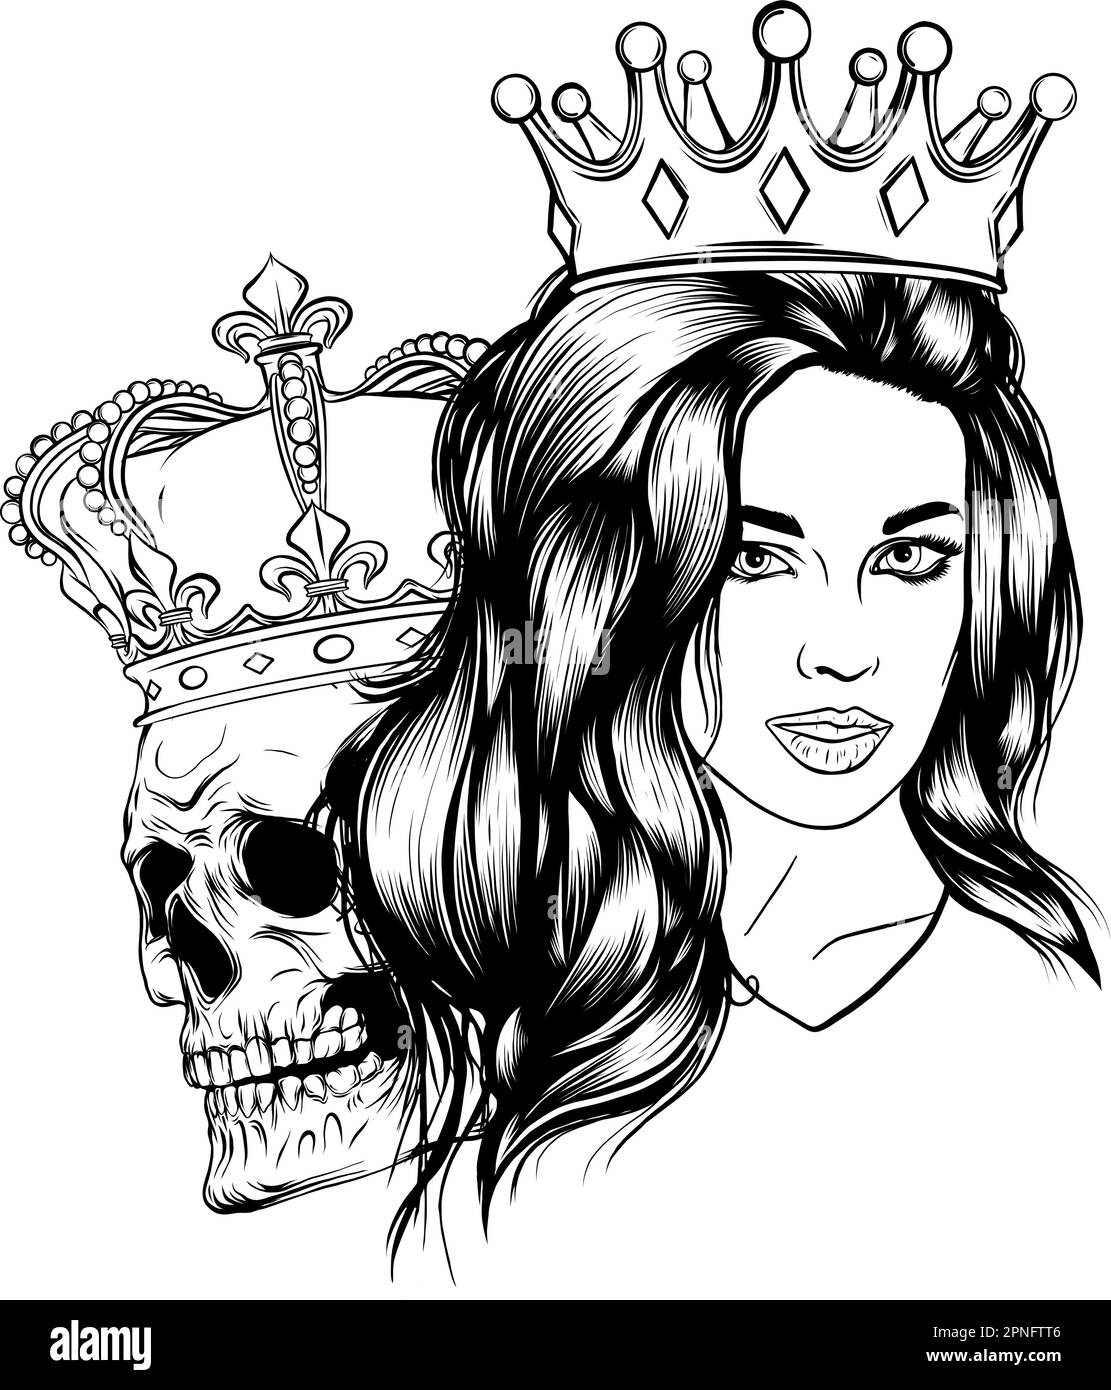 vector illustration of King and queen of death. Portrait of a skull with a crown. Stock Vector